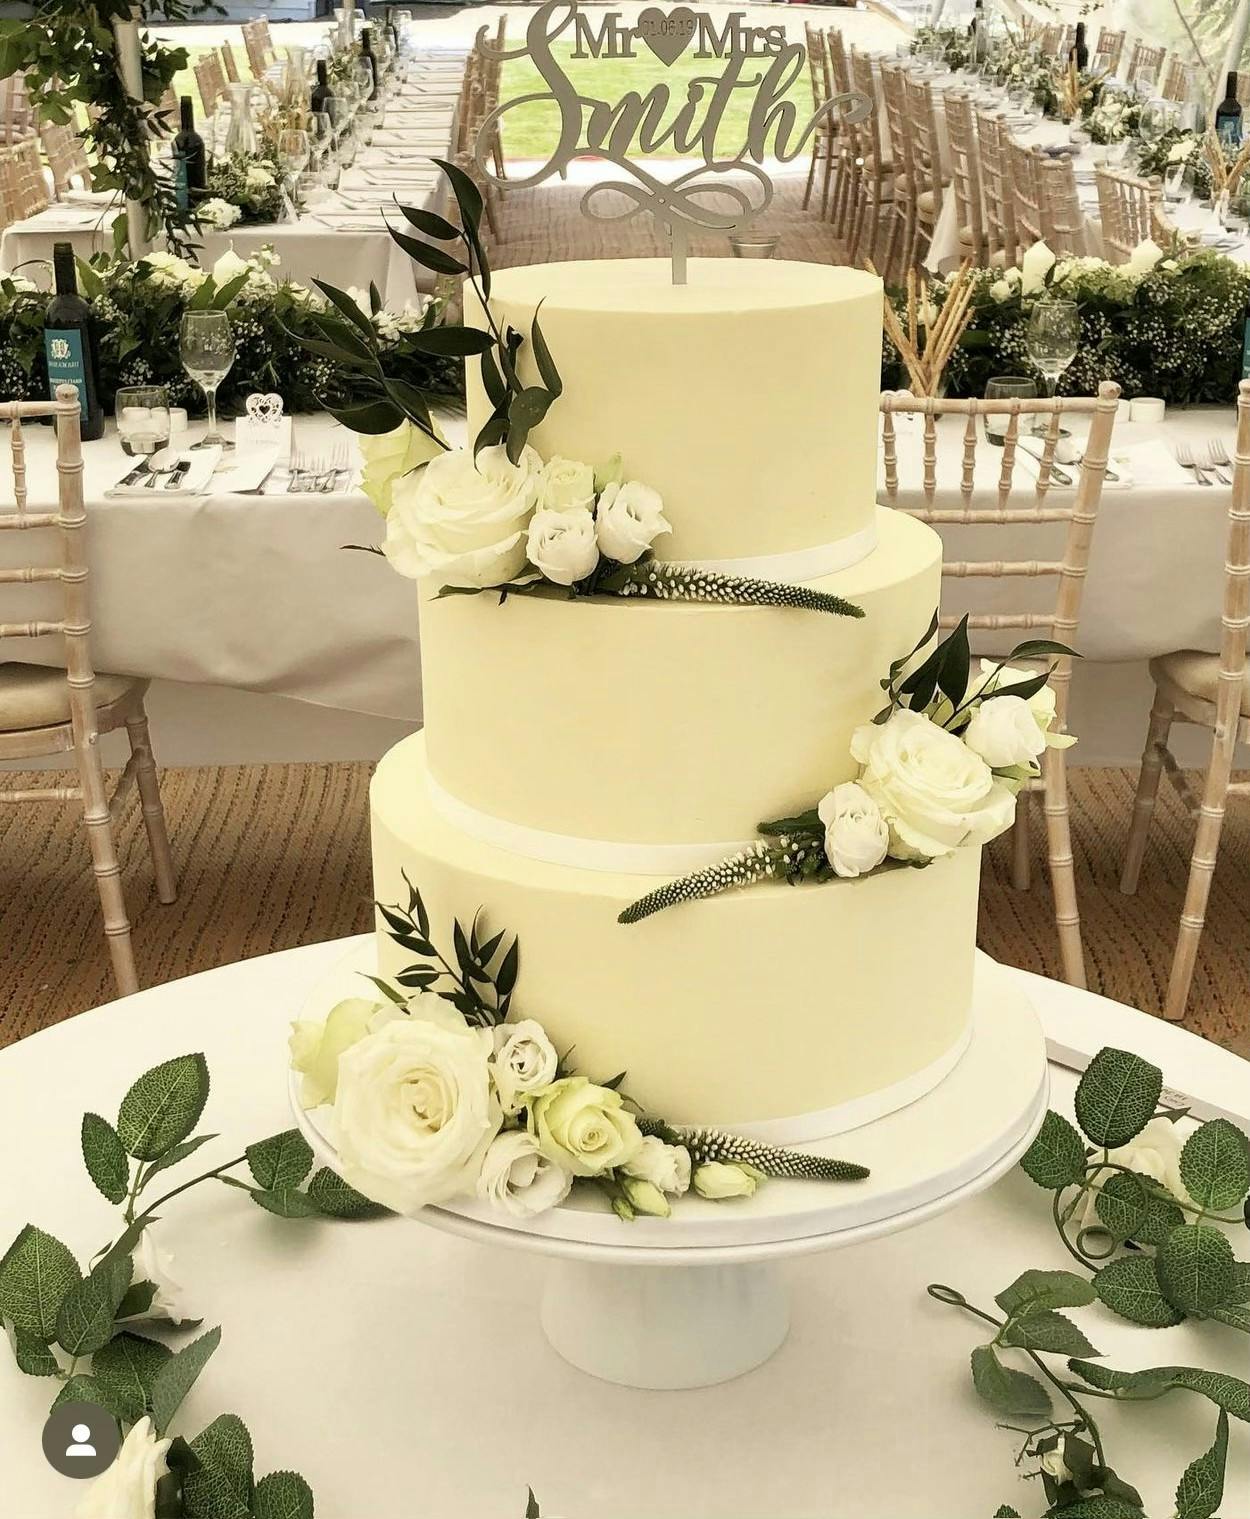 White wedding cake with white flowers and plants for Mr and Mrs Smith